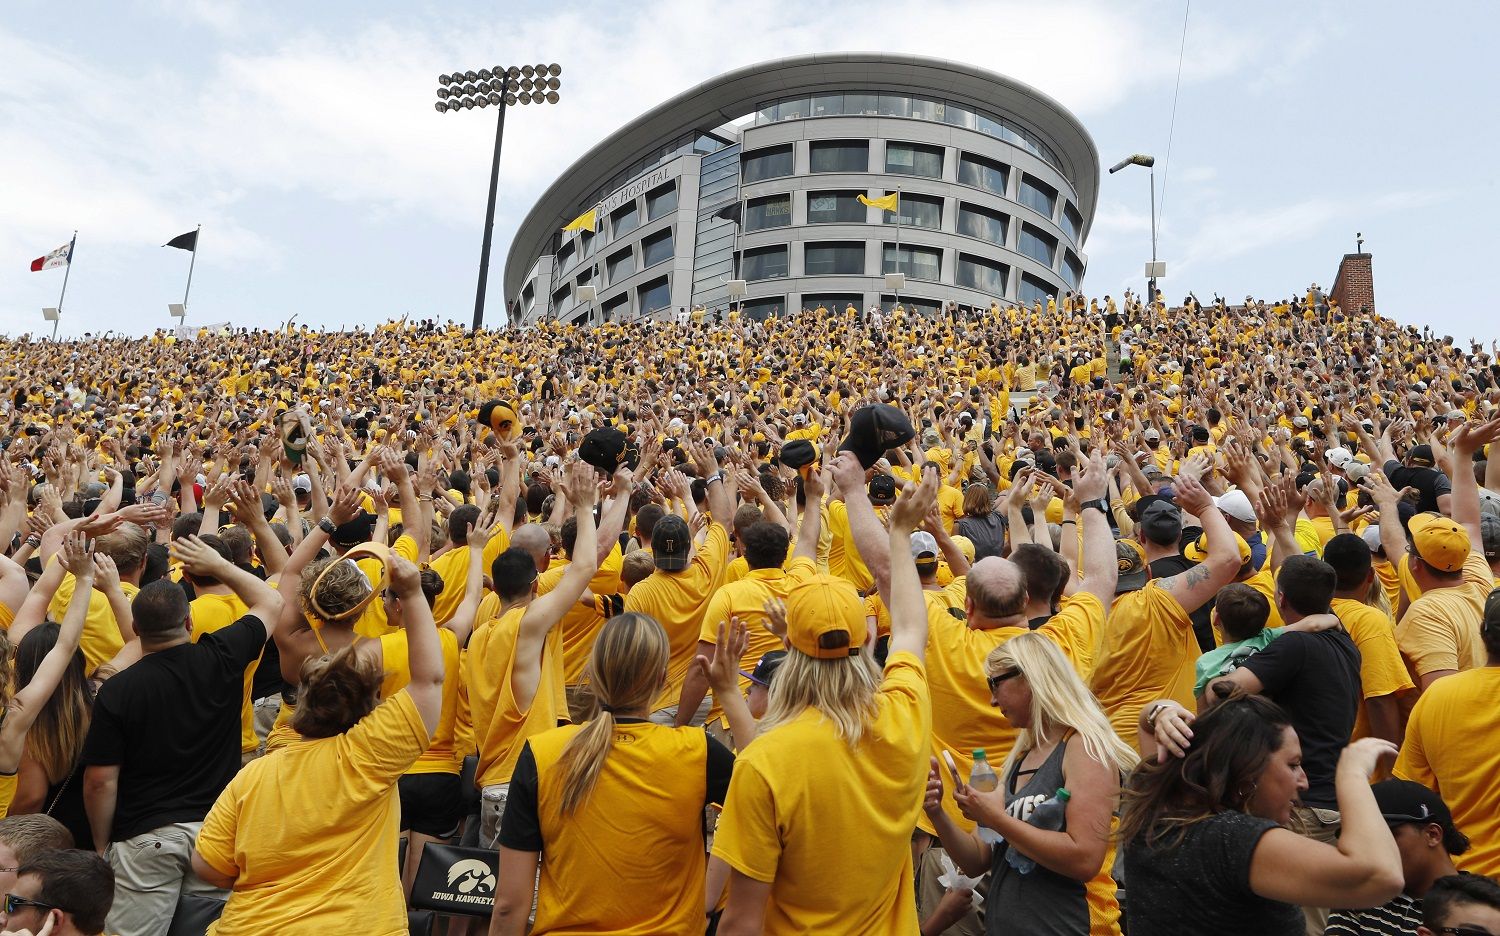 Iowa fans wave to children in the University of Iowa Stead Family Children's Hospital at the end of the first quarter of an NCAA college football game against North Texas, Saturday, Sept. 16, 2017, in Iowa City, Iowa. (AP Photo/Charlie Neibergall)